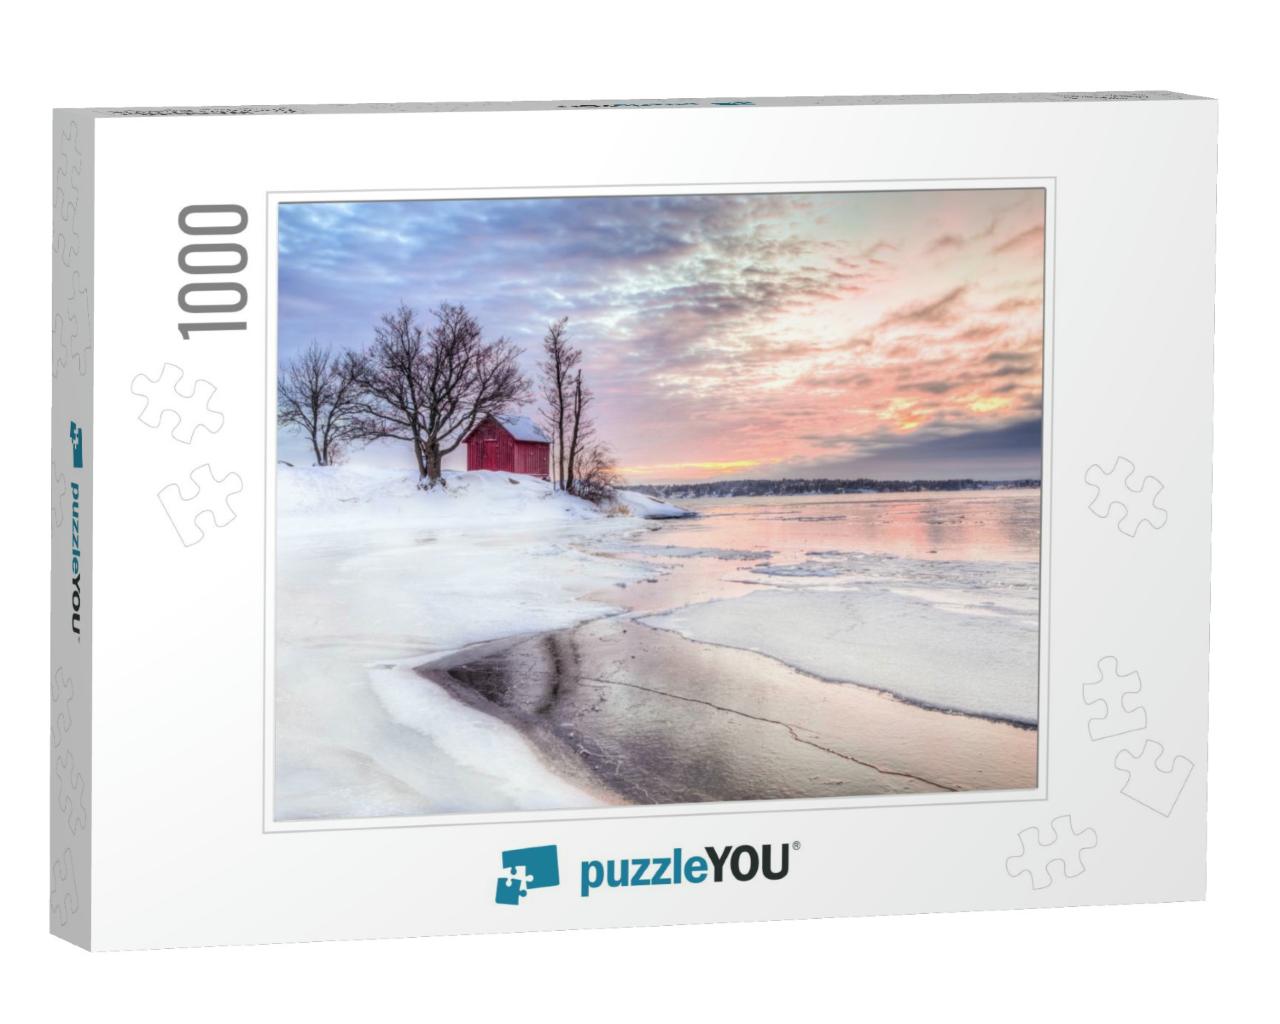 A Winter Photo of a Red Little Cottage with Some Trees in... Jigsaw Puzzle with 1000 pieces